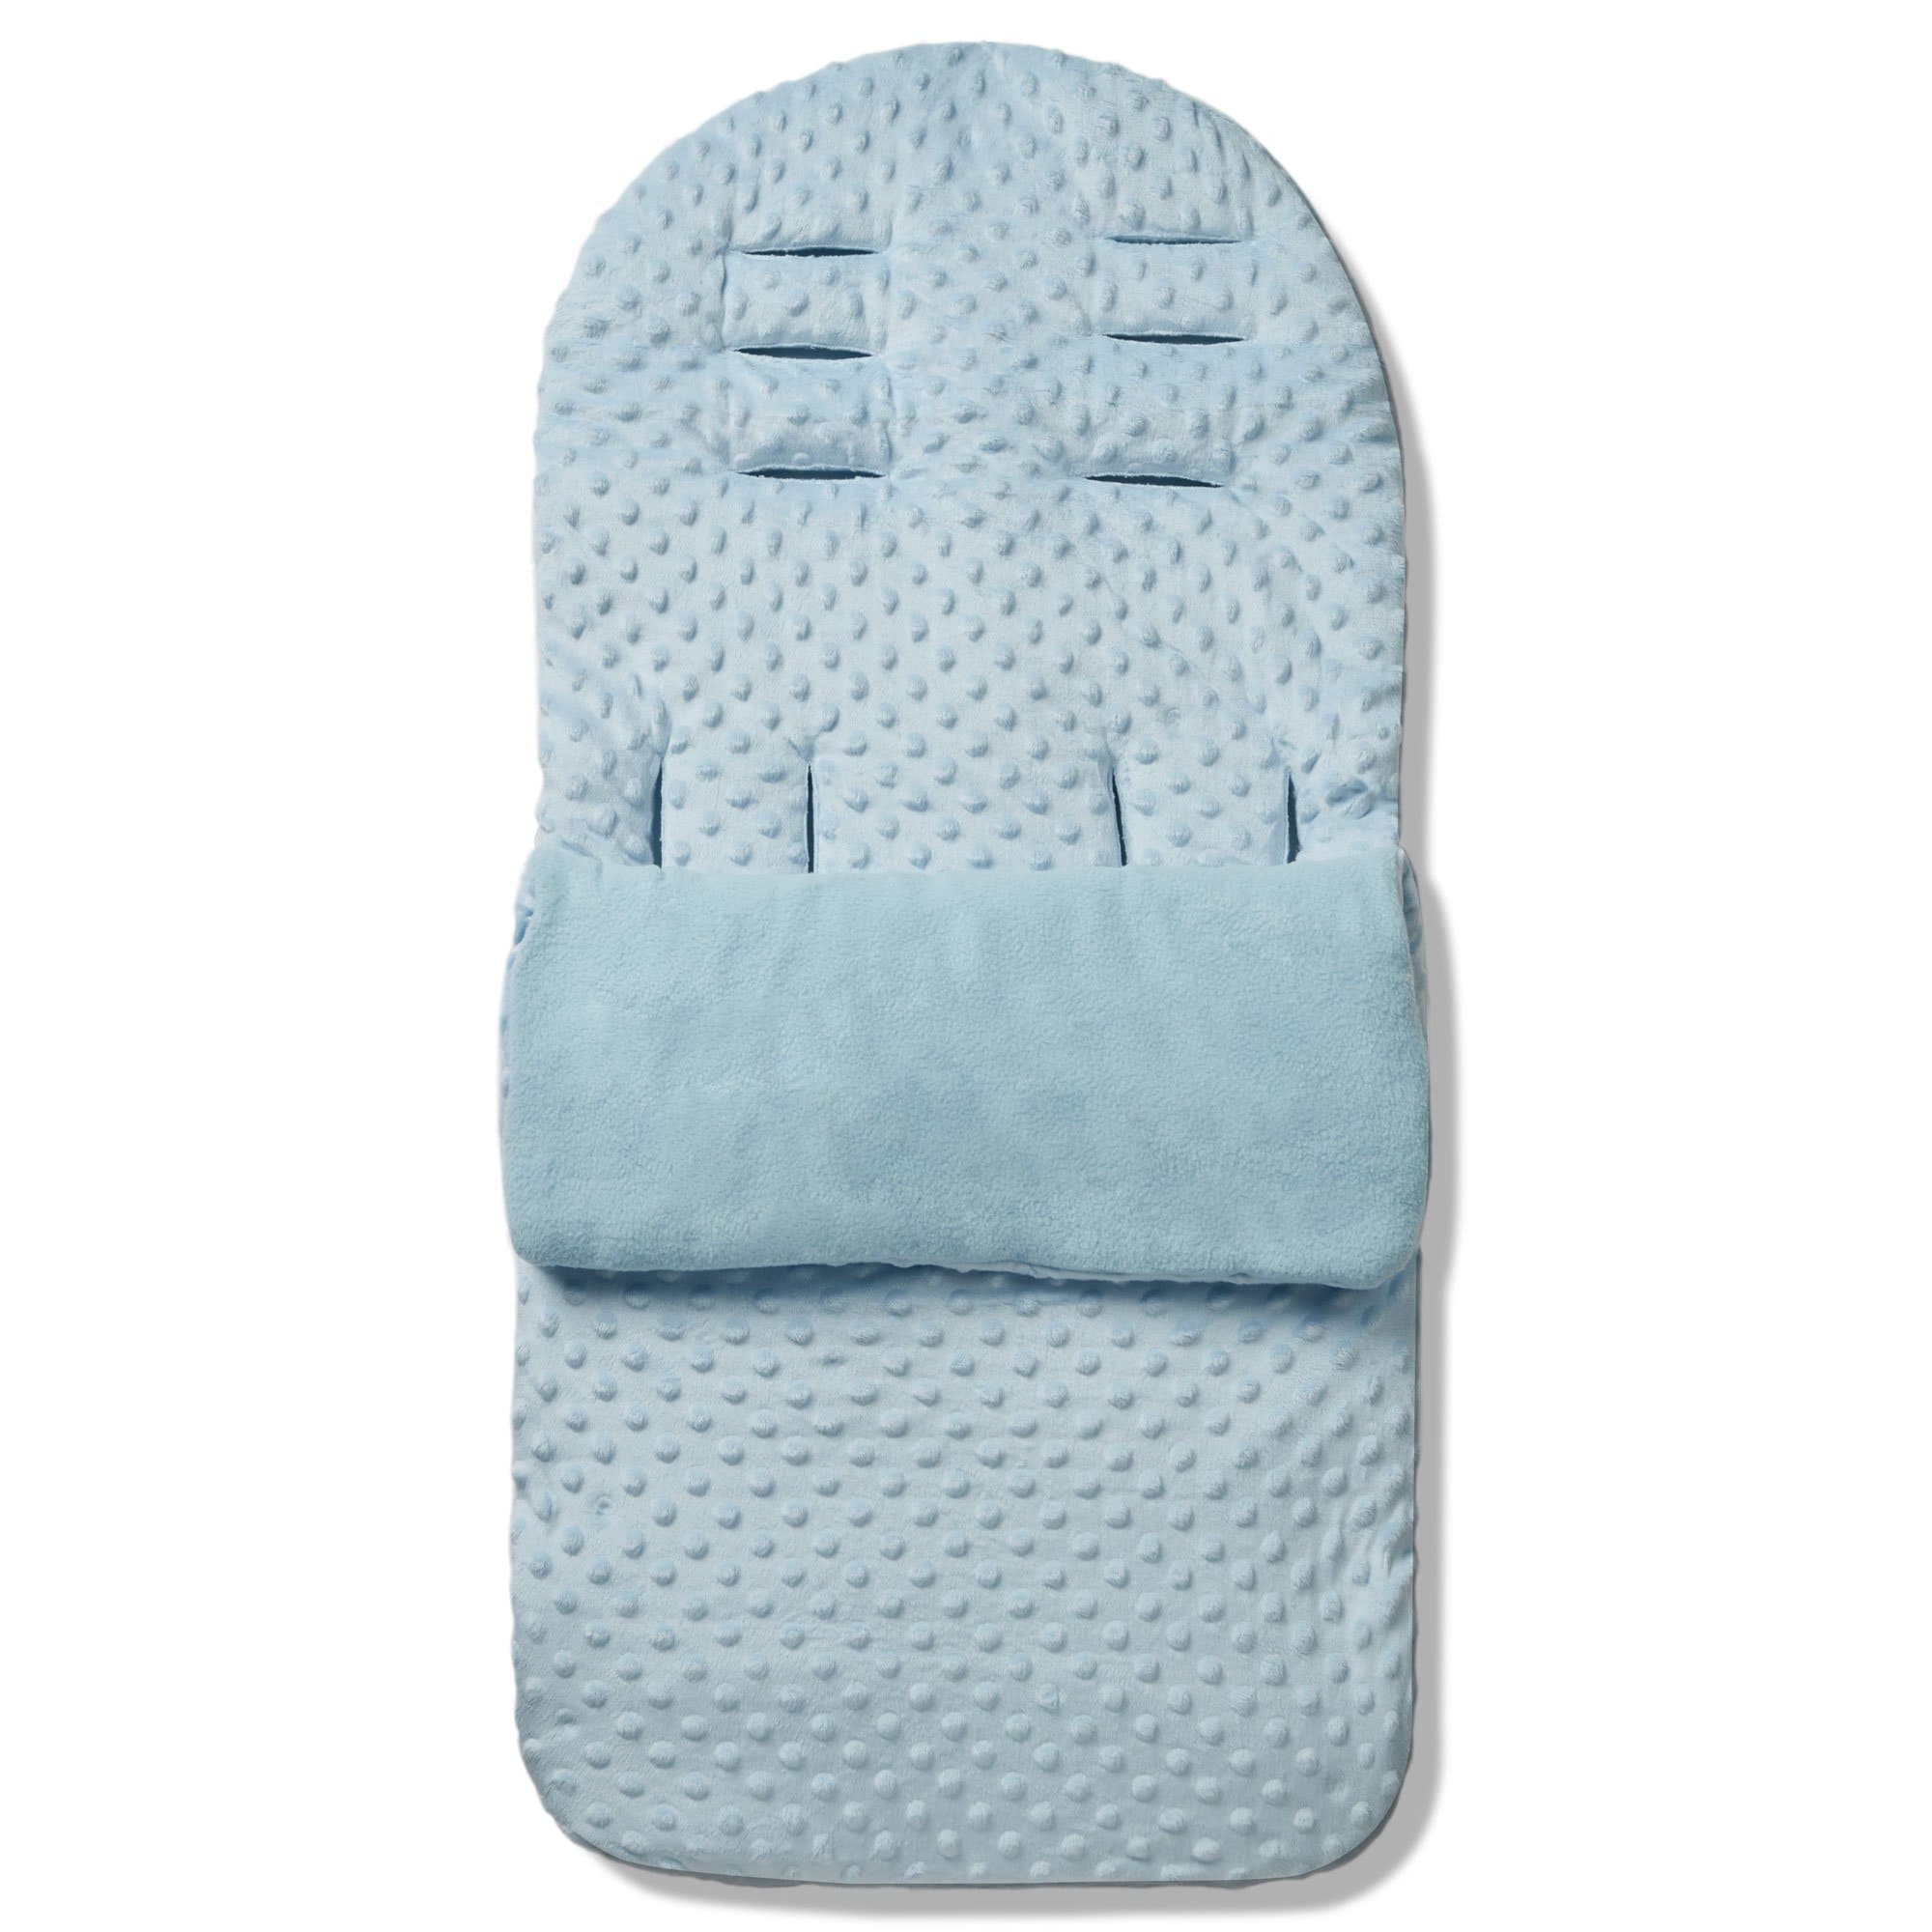 Dimple Footmuff / Cosy Toes Compatible with Koelstra - Blue / Fits All Models | For Your Little One